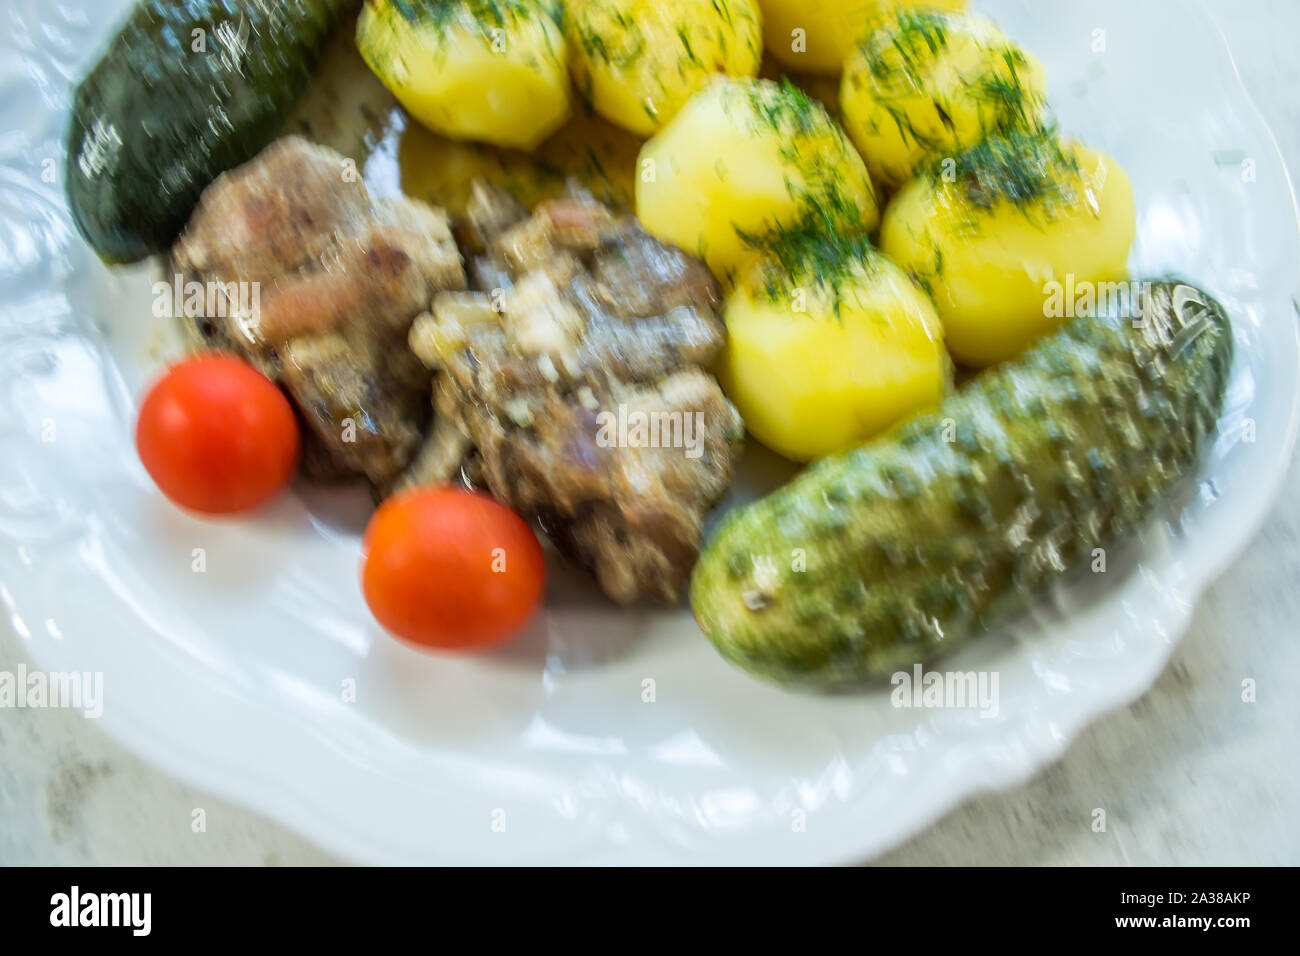 Custom-made lunch with meat and potatoes. Stock Photo